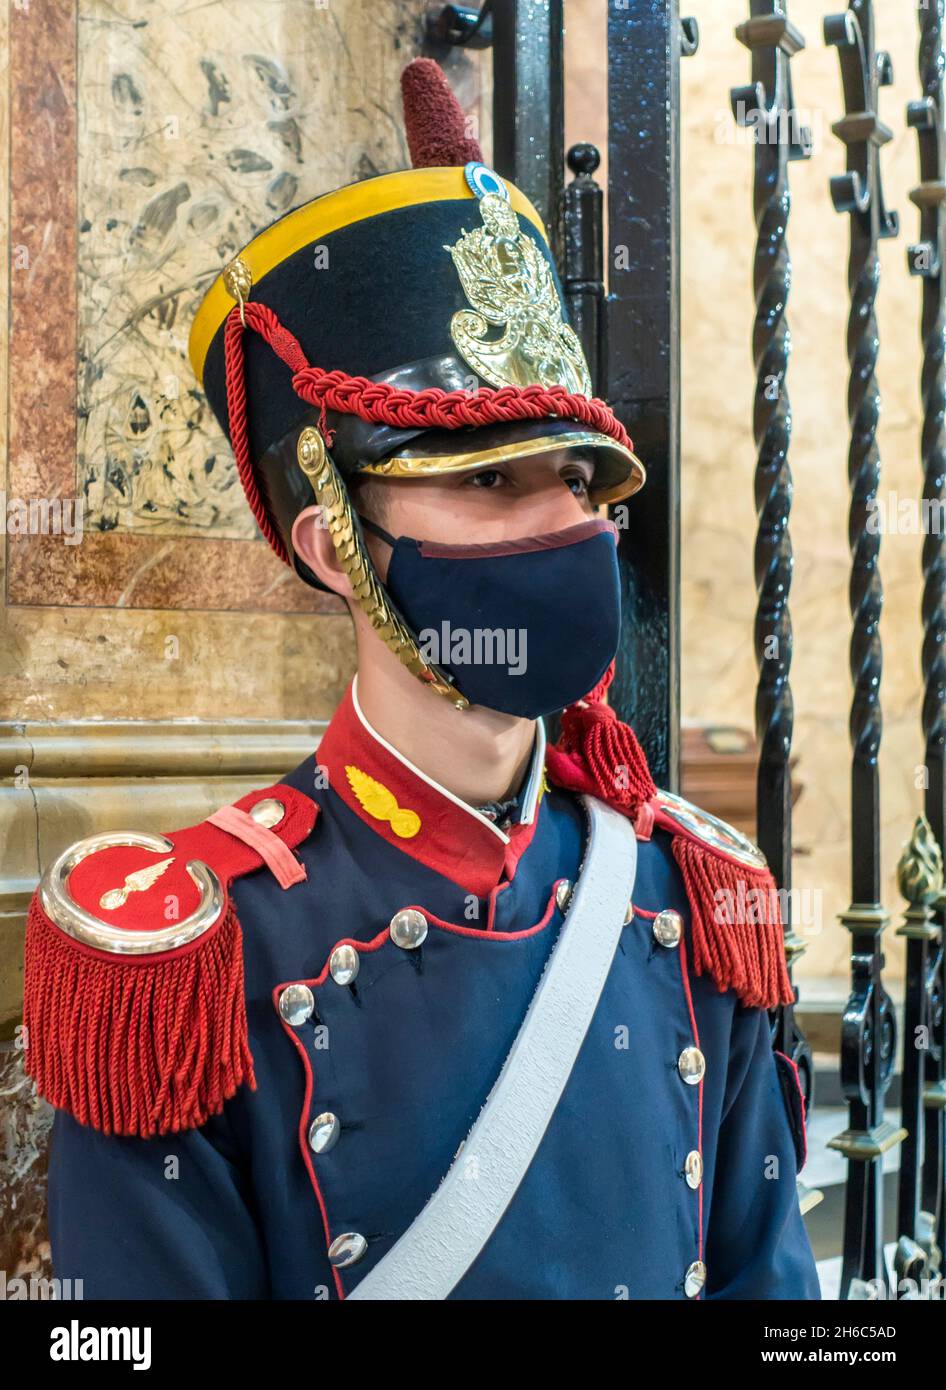 Argentine grenadier with facemask during Covid-19 pandemic stands guard at the tomb of liberation hero Jose de San Martin in the Metropolitan Cathedra Stock Photo